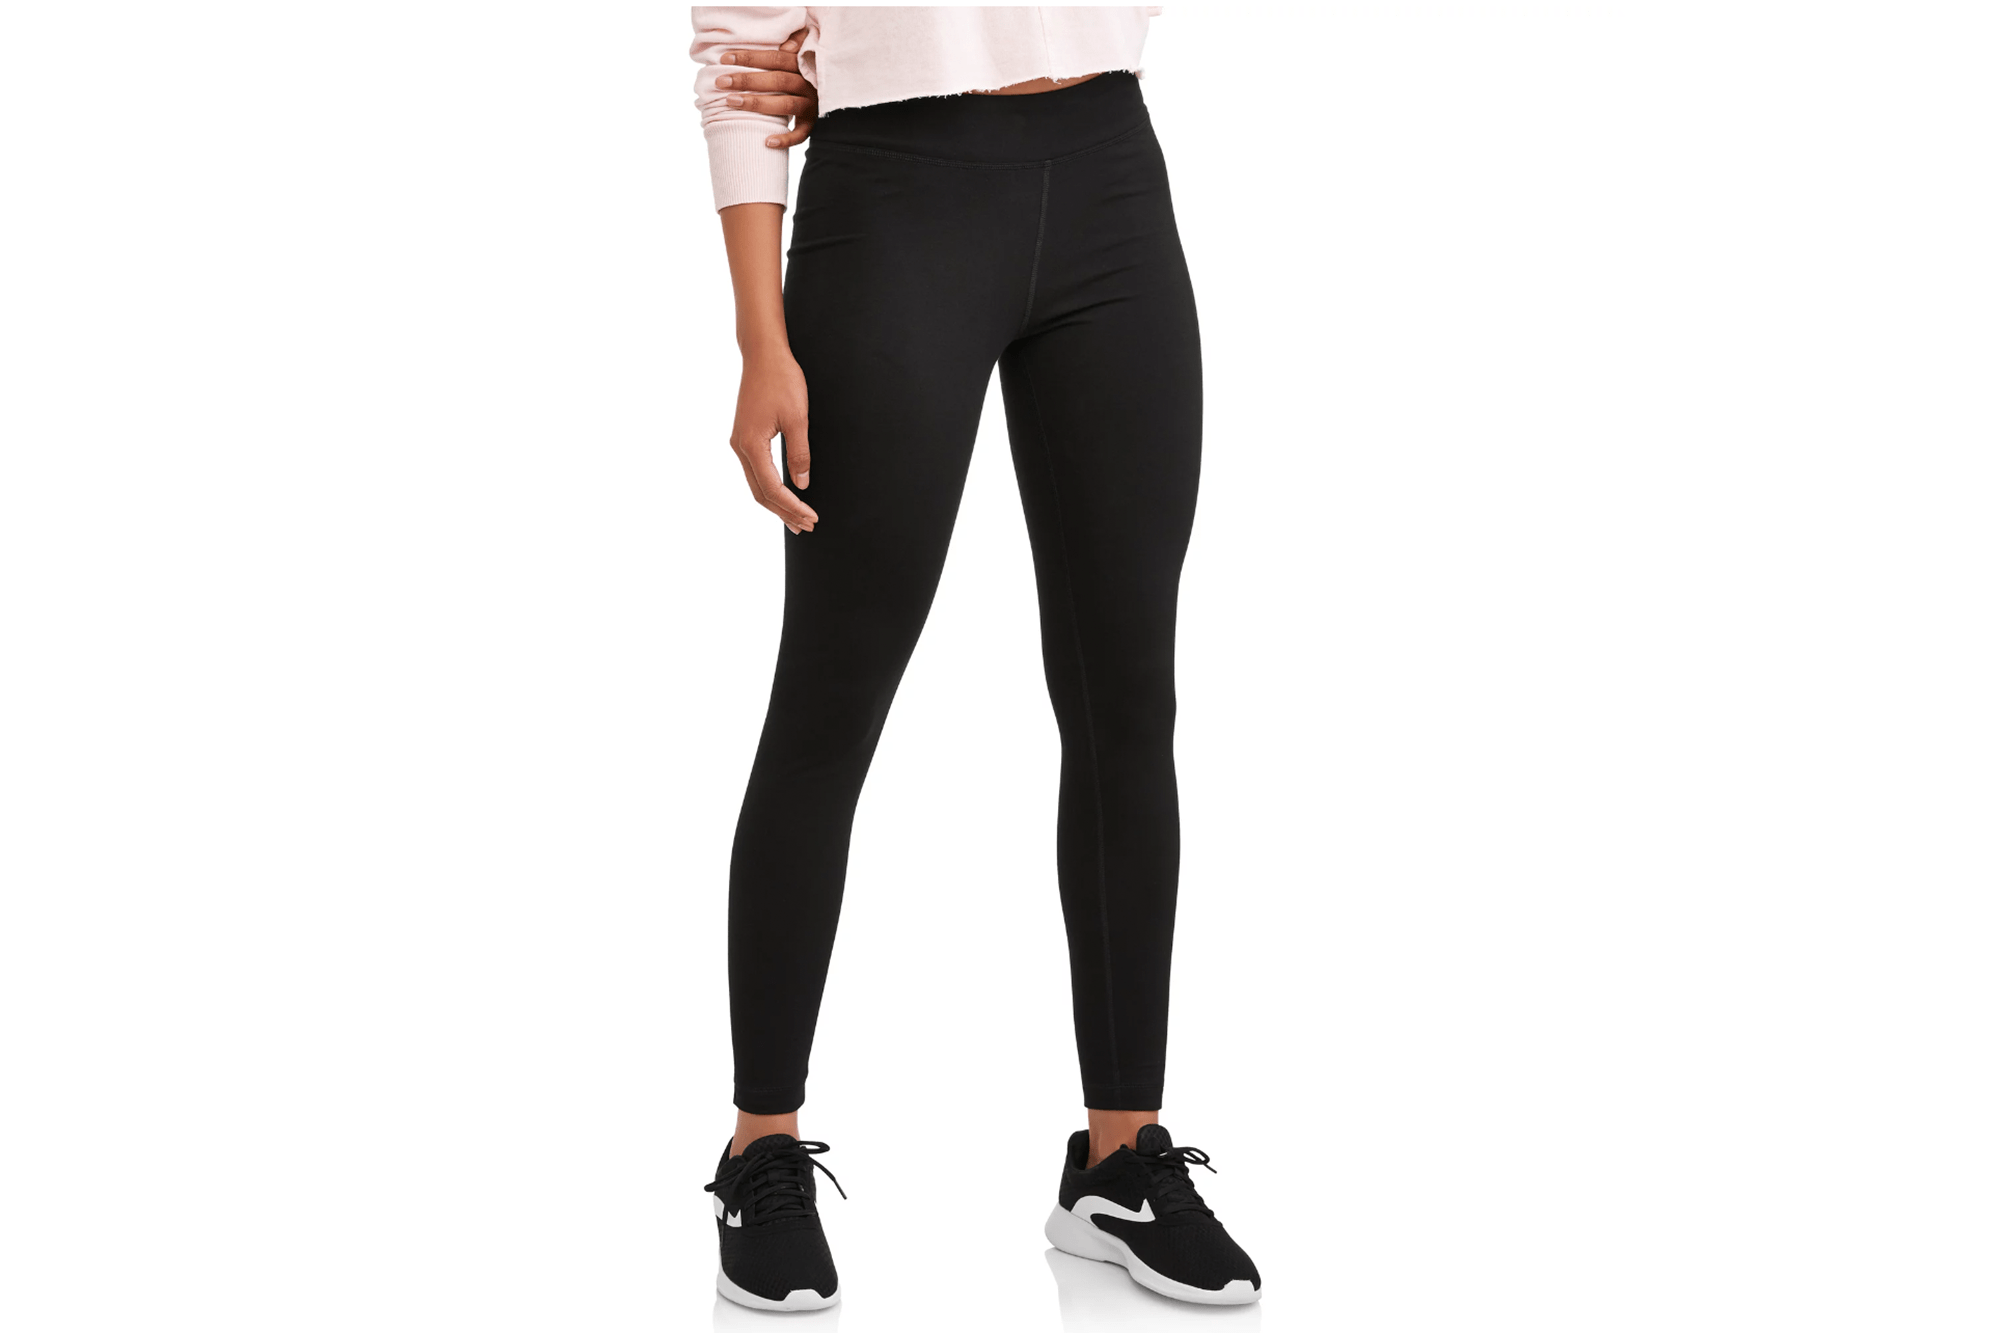 These Walmart Bestselling Leggings Are Only $10